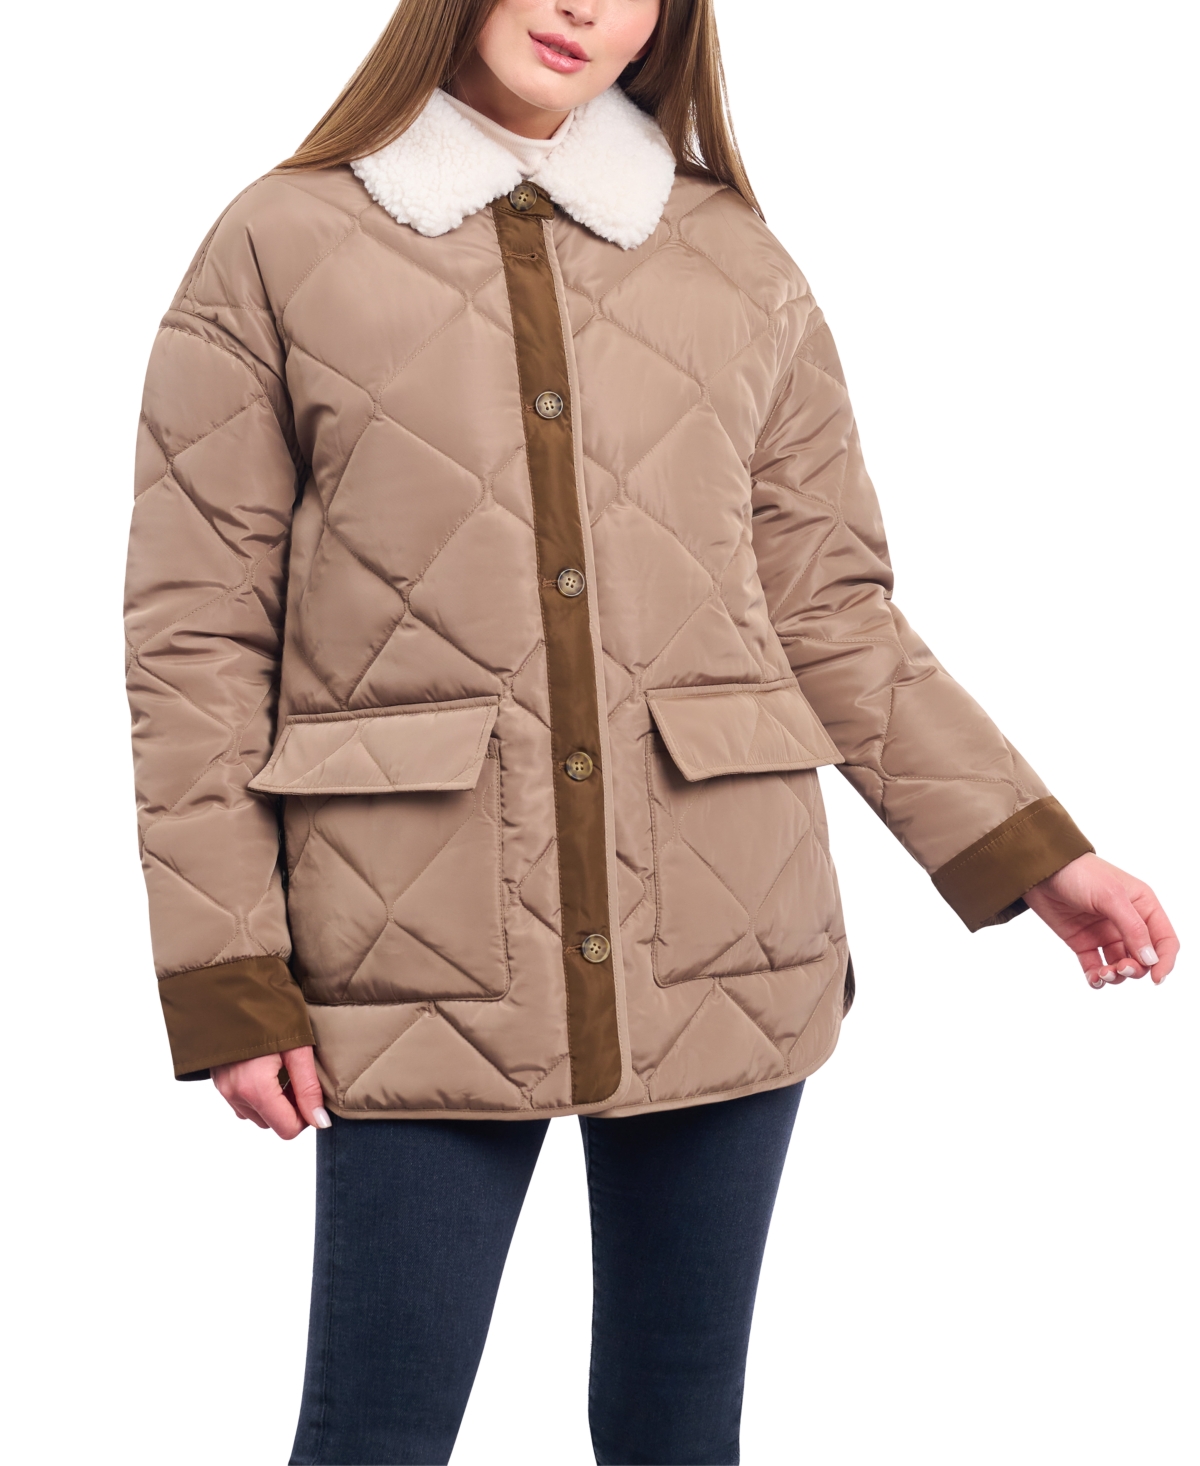 Lucky Brand Coats & Jackets in Shop by Category